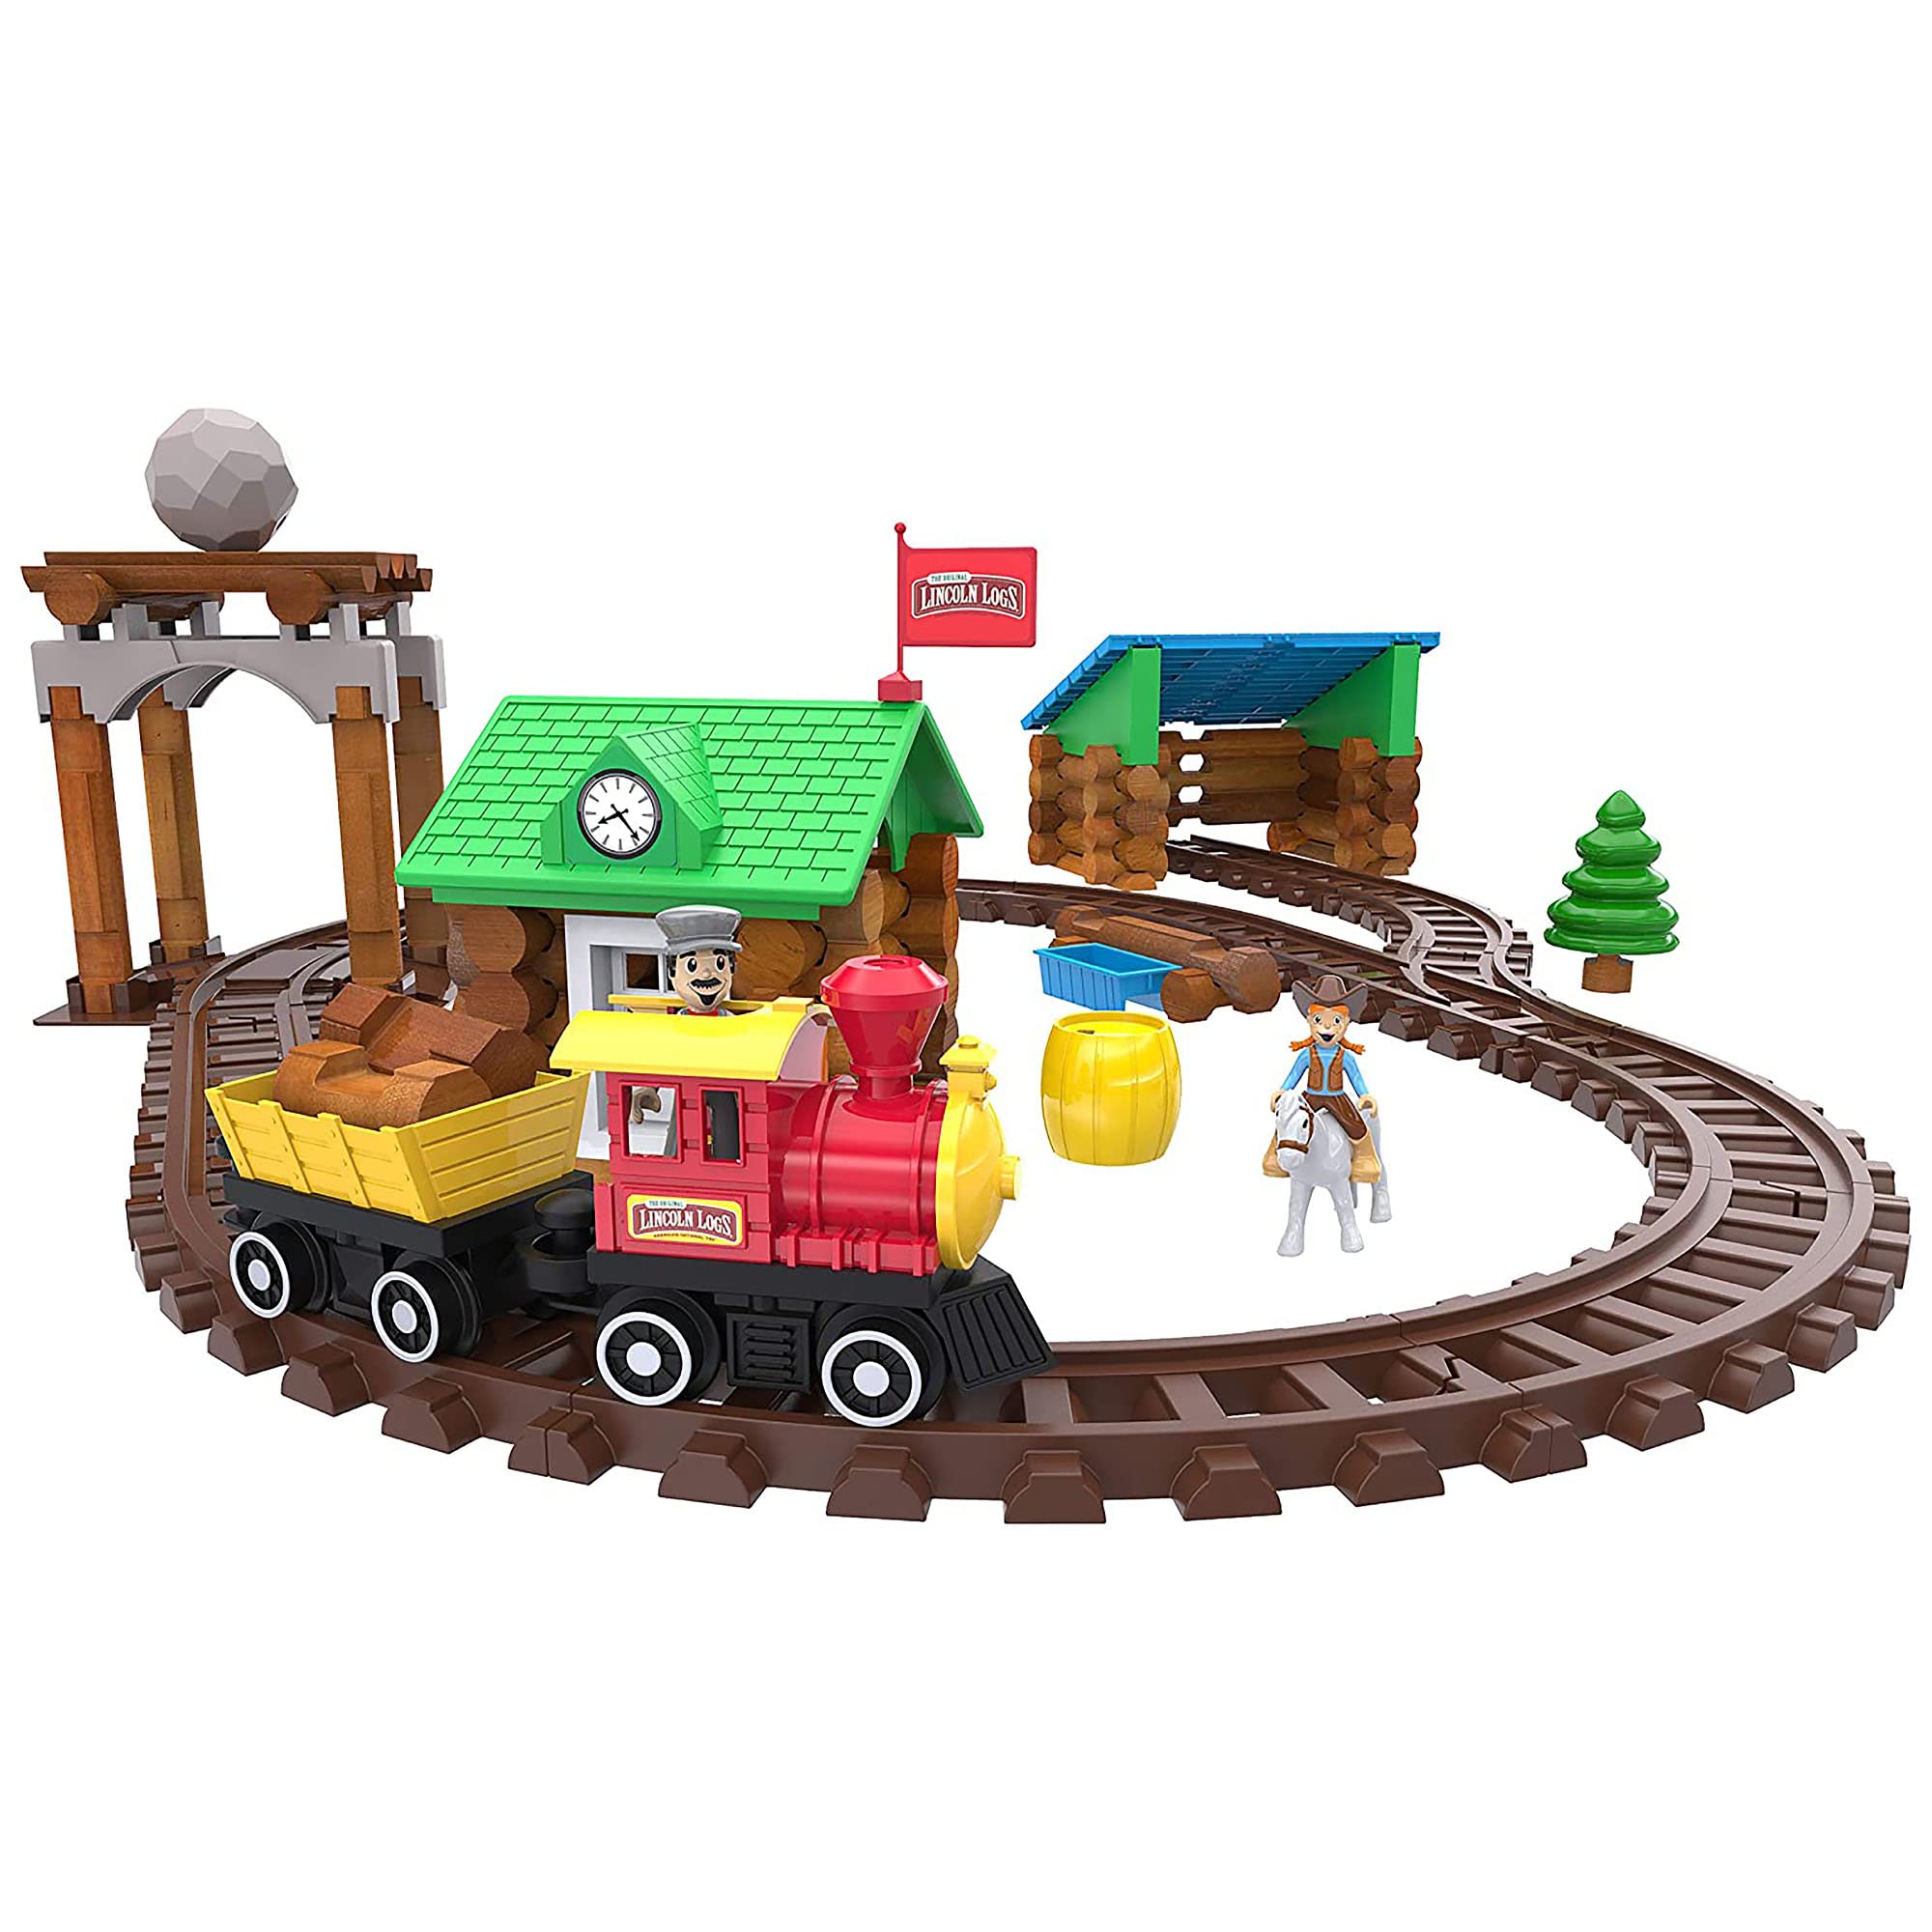 LINCOLN LOGS-Sawmill Express Train - 101 Parts - Real Wood Logs - Buildable Train Track-Ages 3+ - Best Retro Building Gift Set for Boys/Girls-Creative Construction Engineering-Preschool Education Toy